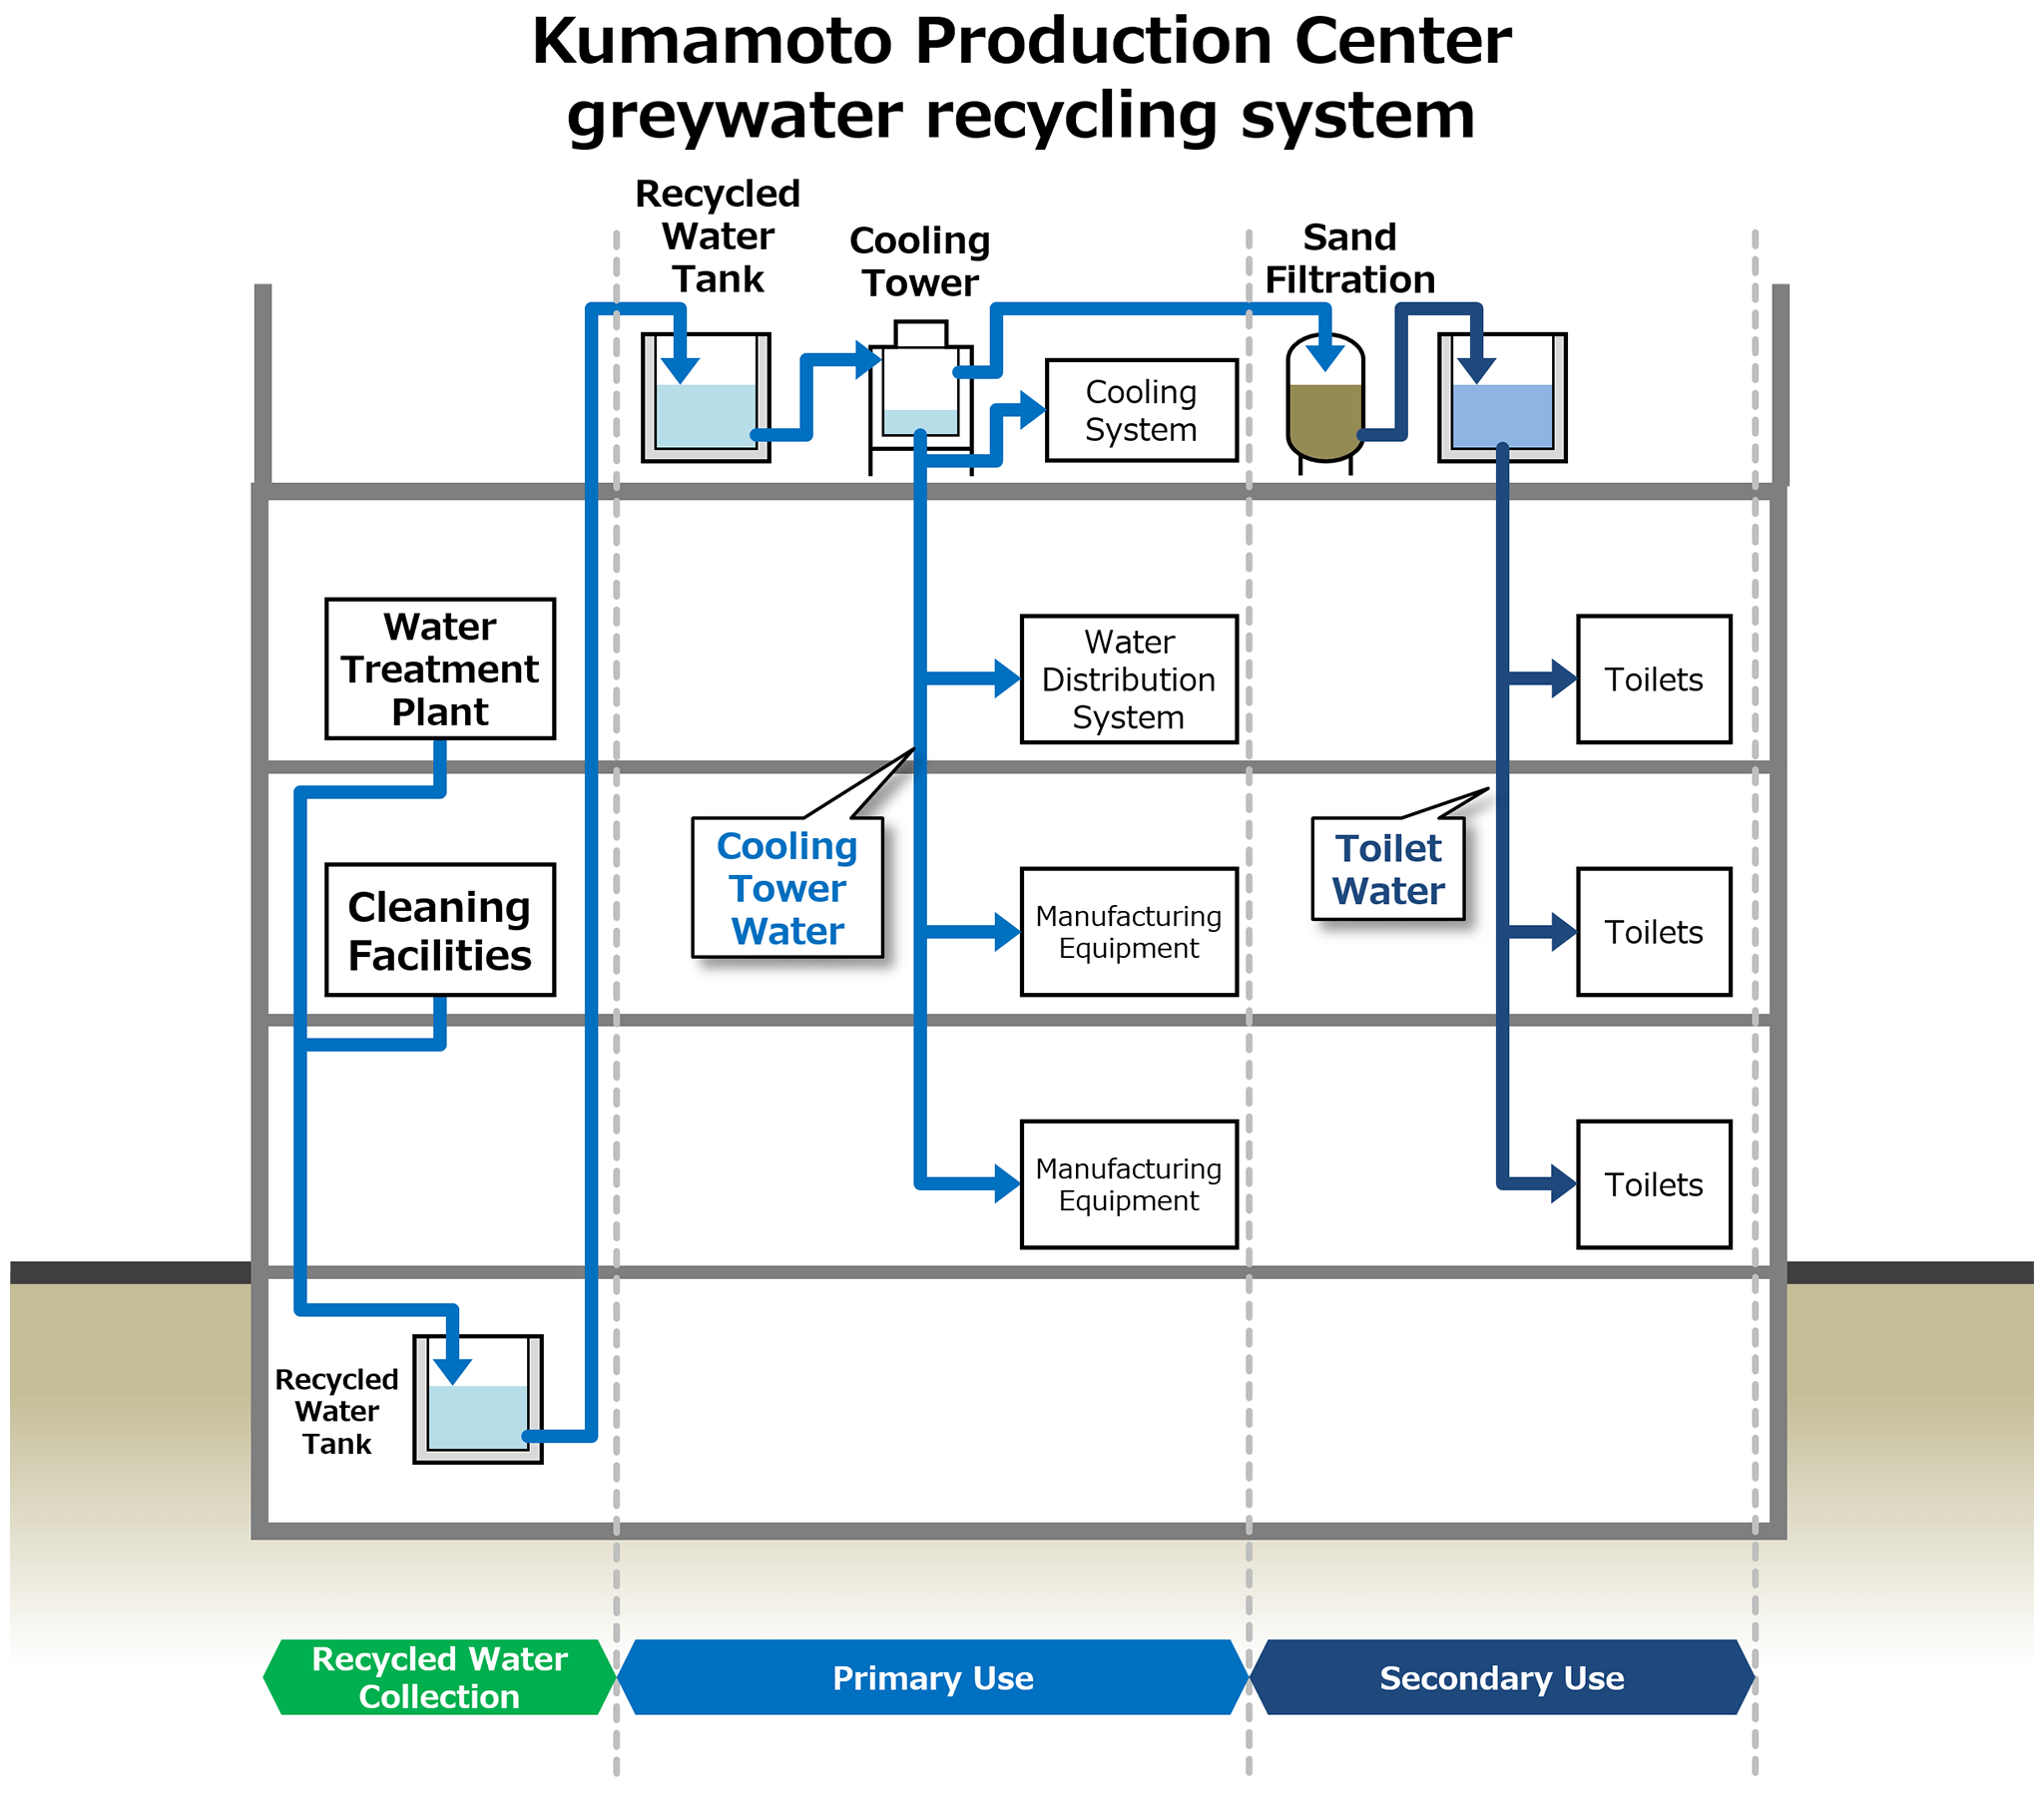 Figure: Greywater recycling system in Kumamoto Production Center